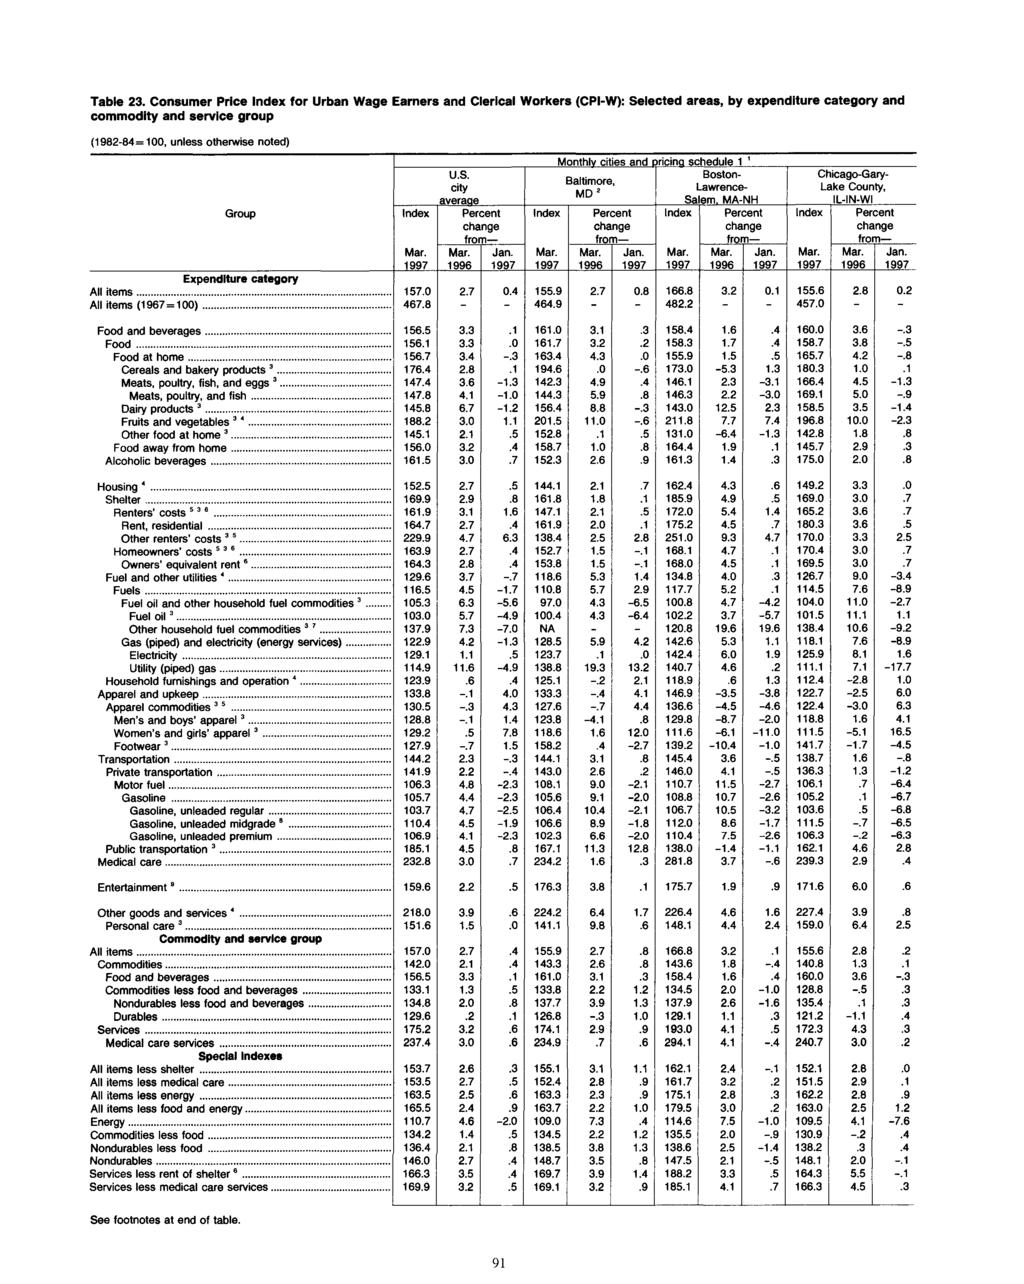 Table 23. Consumer Price for Urban Wage Earners and Clerical Workers (CPI-W): Selected areas, by expenditure category and commodity and service group Group All item s... All items (1967=100).